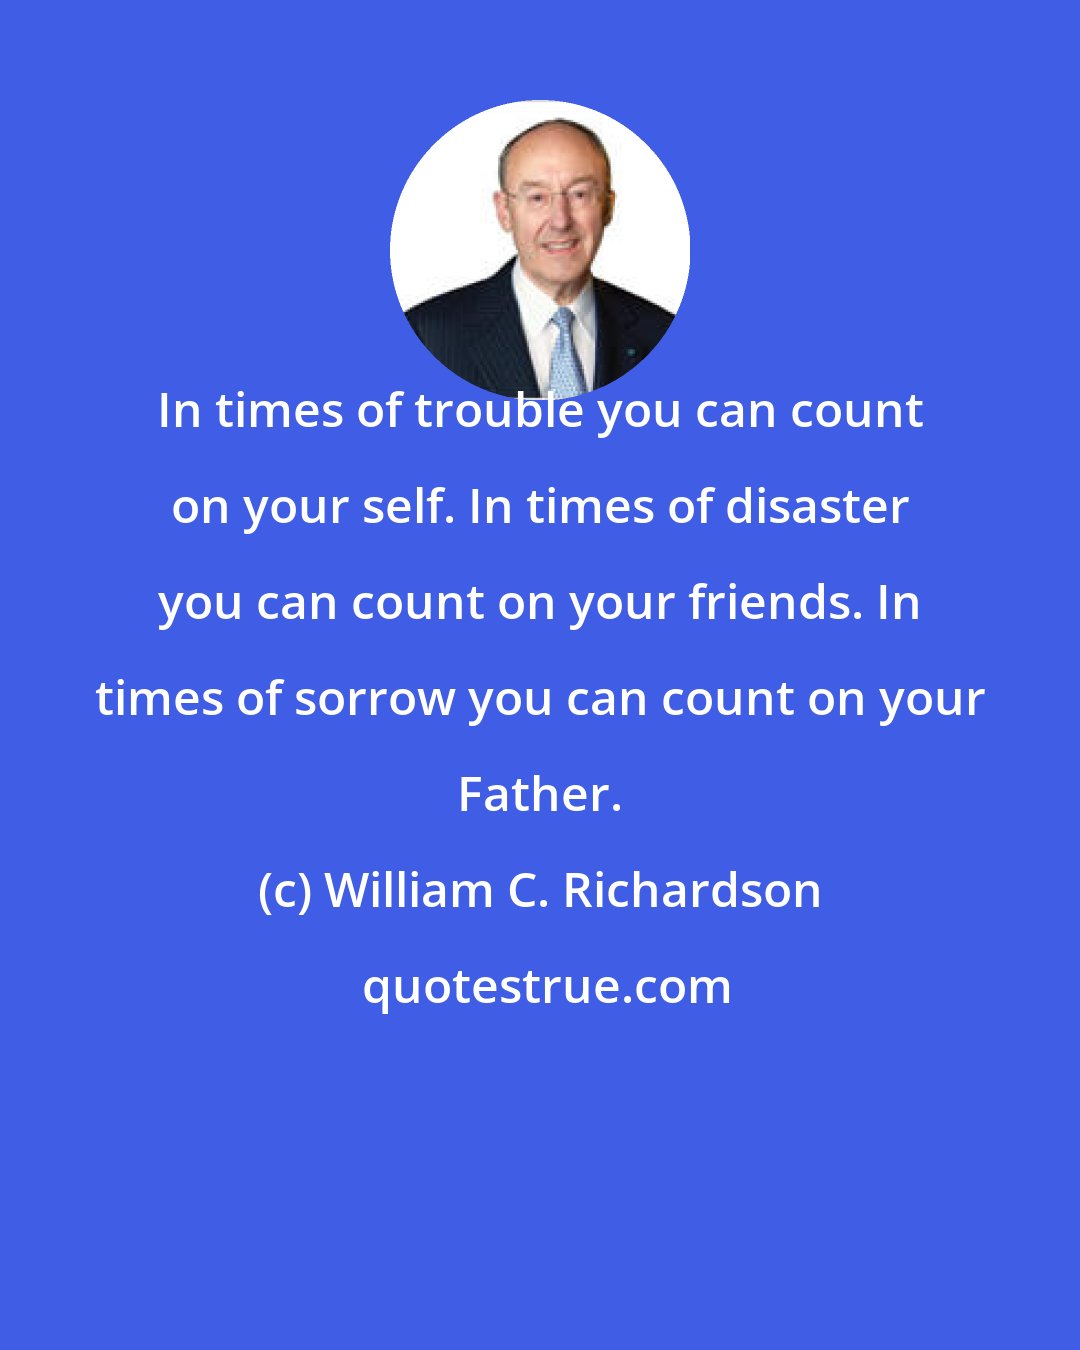 William C. Richardson: In times of trouble you can count on your self. In times of disaster you can count on your friends. In times of sorrow you can count on your Father.